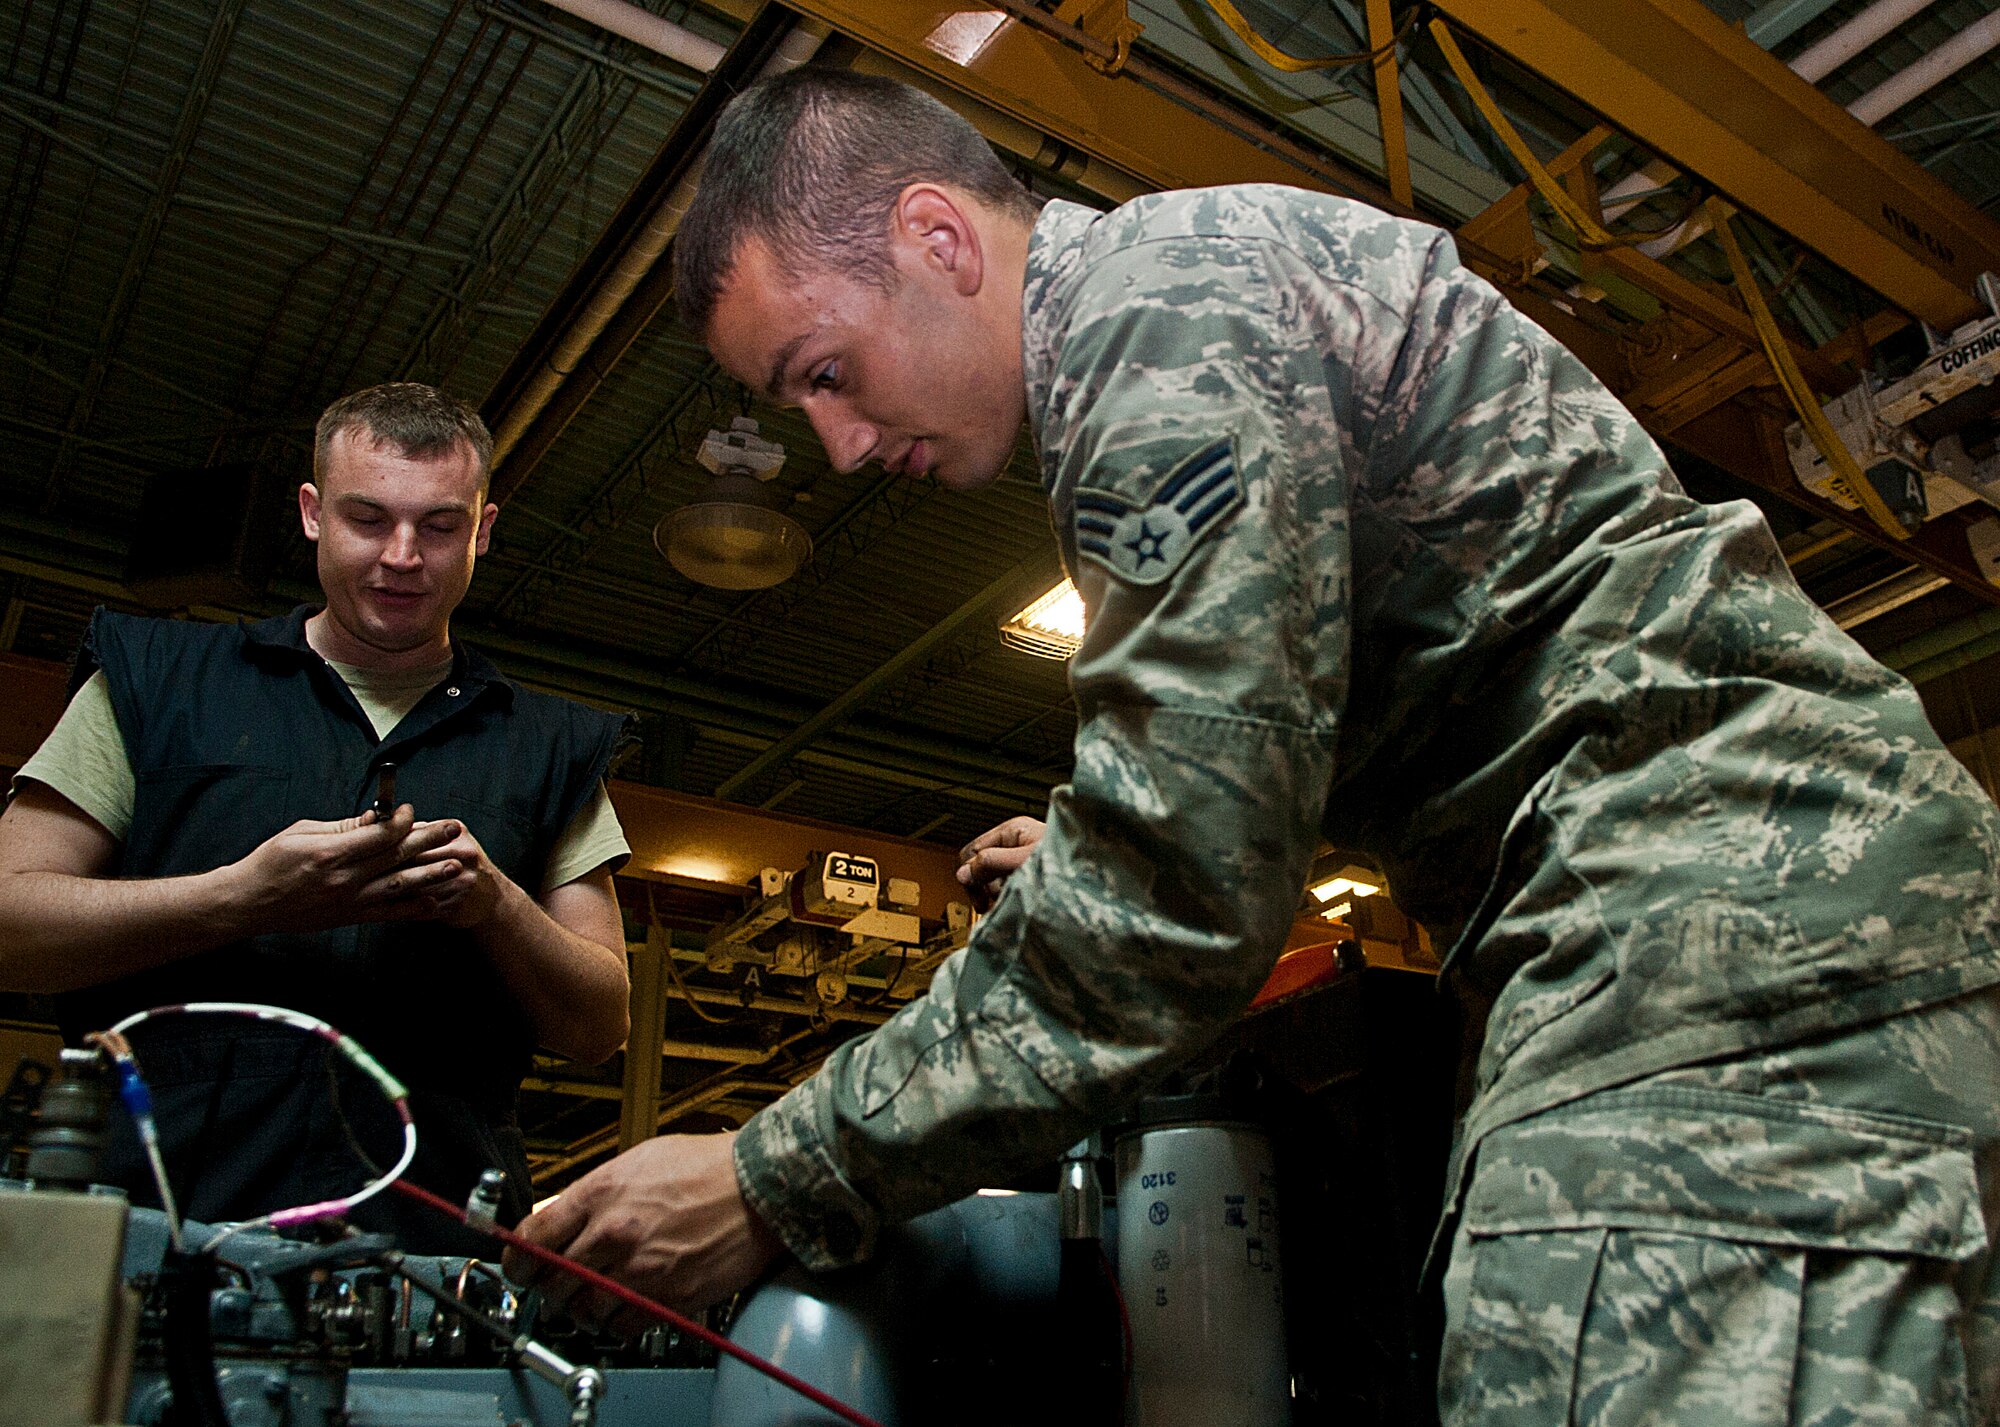 (From left) Senior Airman James Kopp and Senior Airman Cody Crawford, 5th Maintenance Squadron aerospace ground equipment journeymen, check an exhaust cap on a generator at Minot Air Force Base, N.D., Oct. 5, 2016. The AGE Airmen perform a wide variety of tasks, from repairing malfunctioning engines to performing inspections on generators. (U.S. Air Force photo/Airman 1st Class Jonathan McElderry)